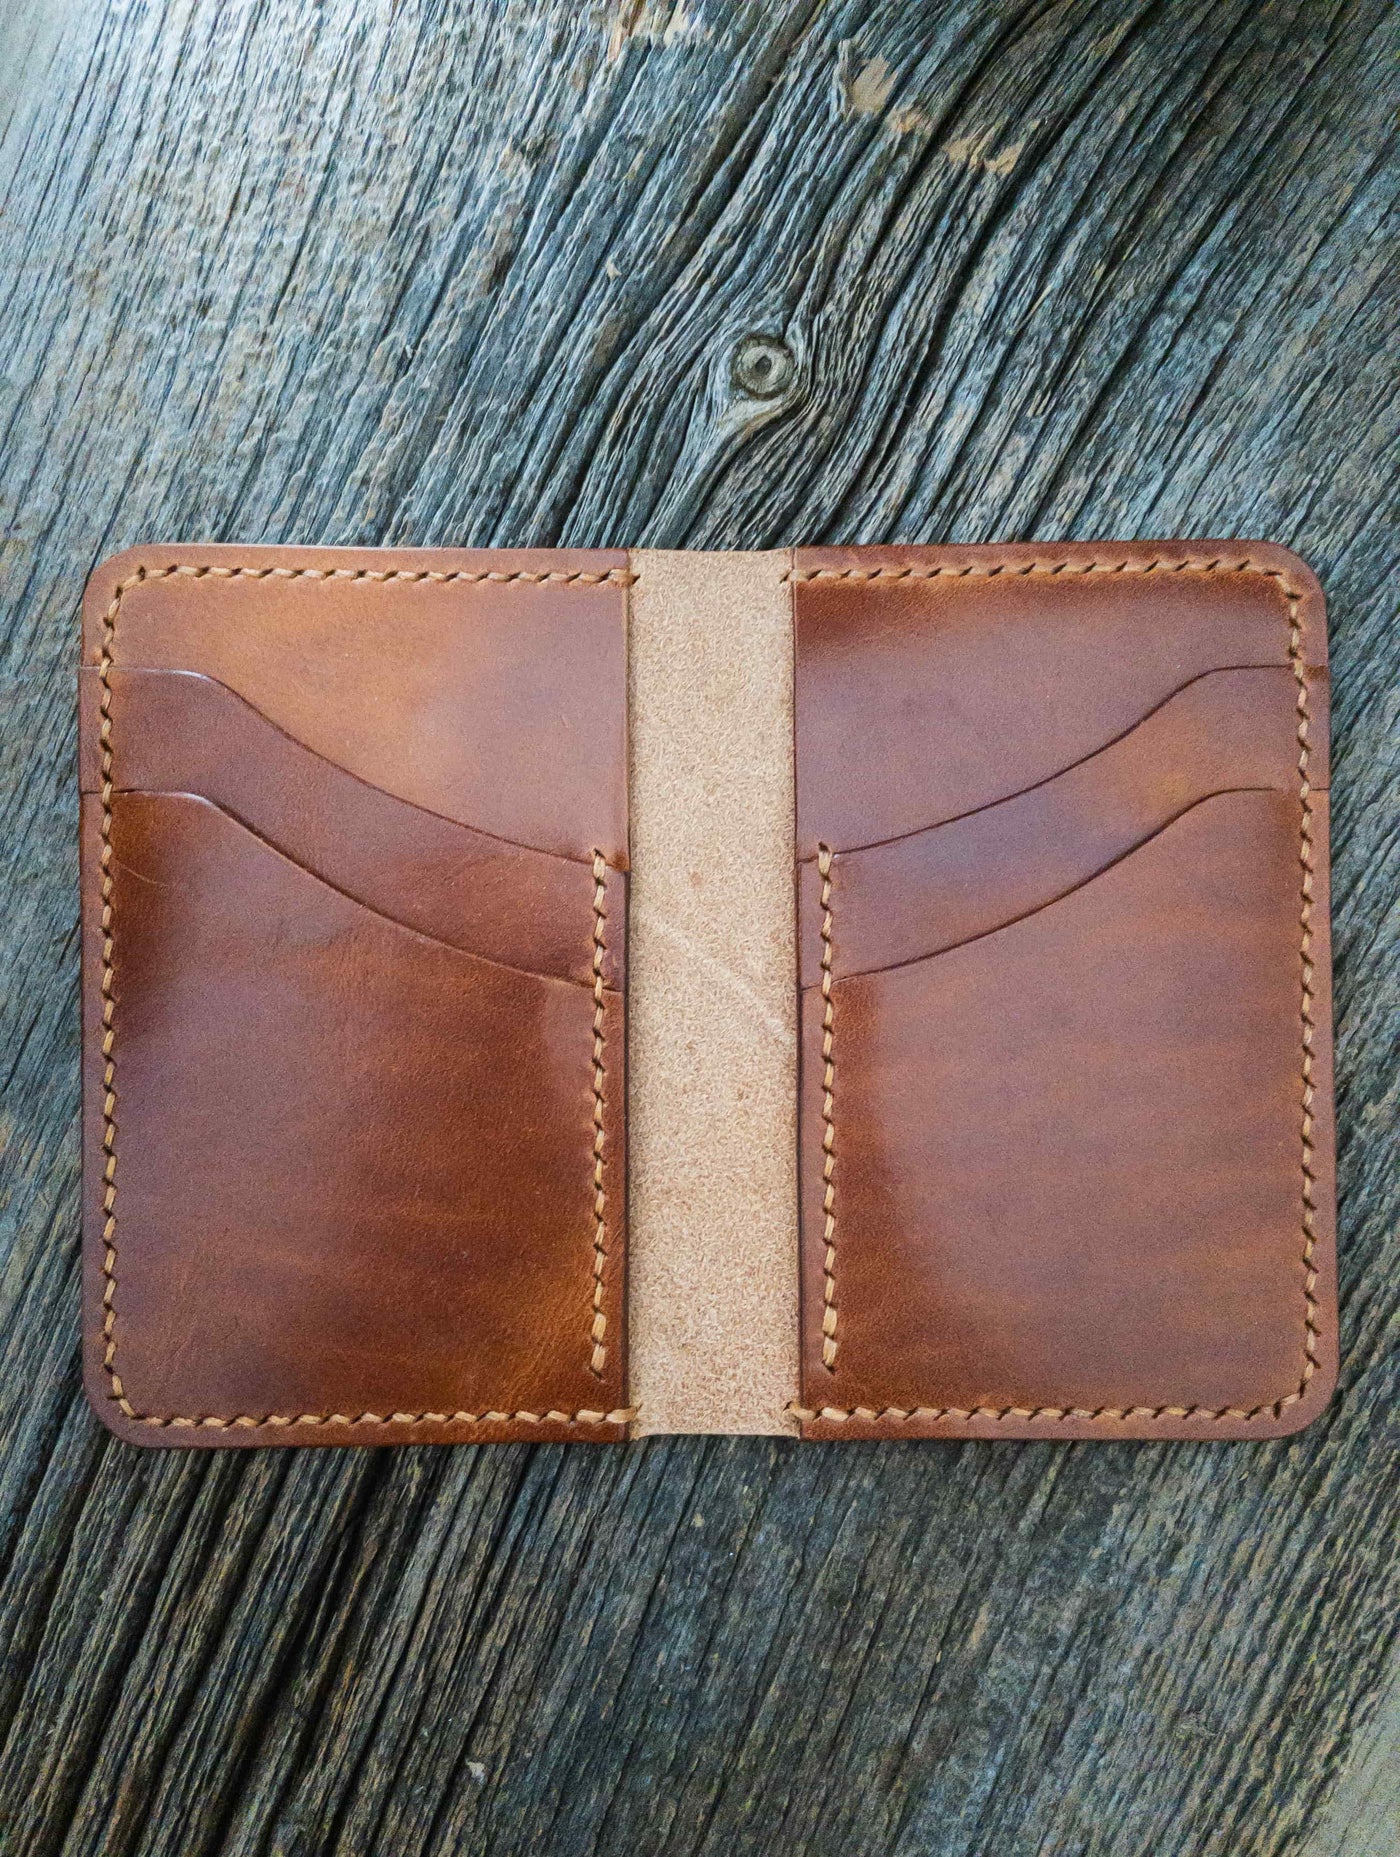 6 Pack: Brown Leather Strip by ArtMinds, Size: 1.5” x 42”